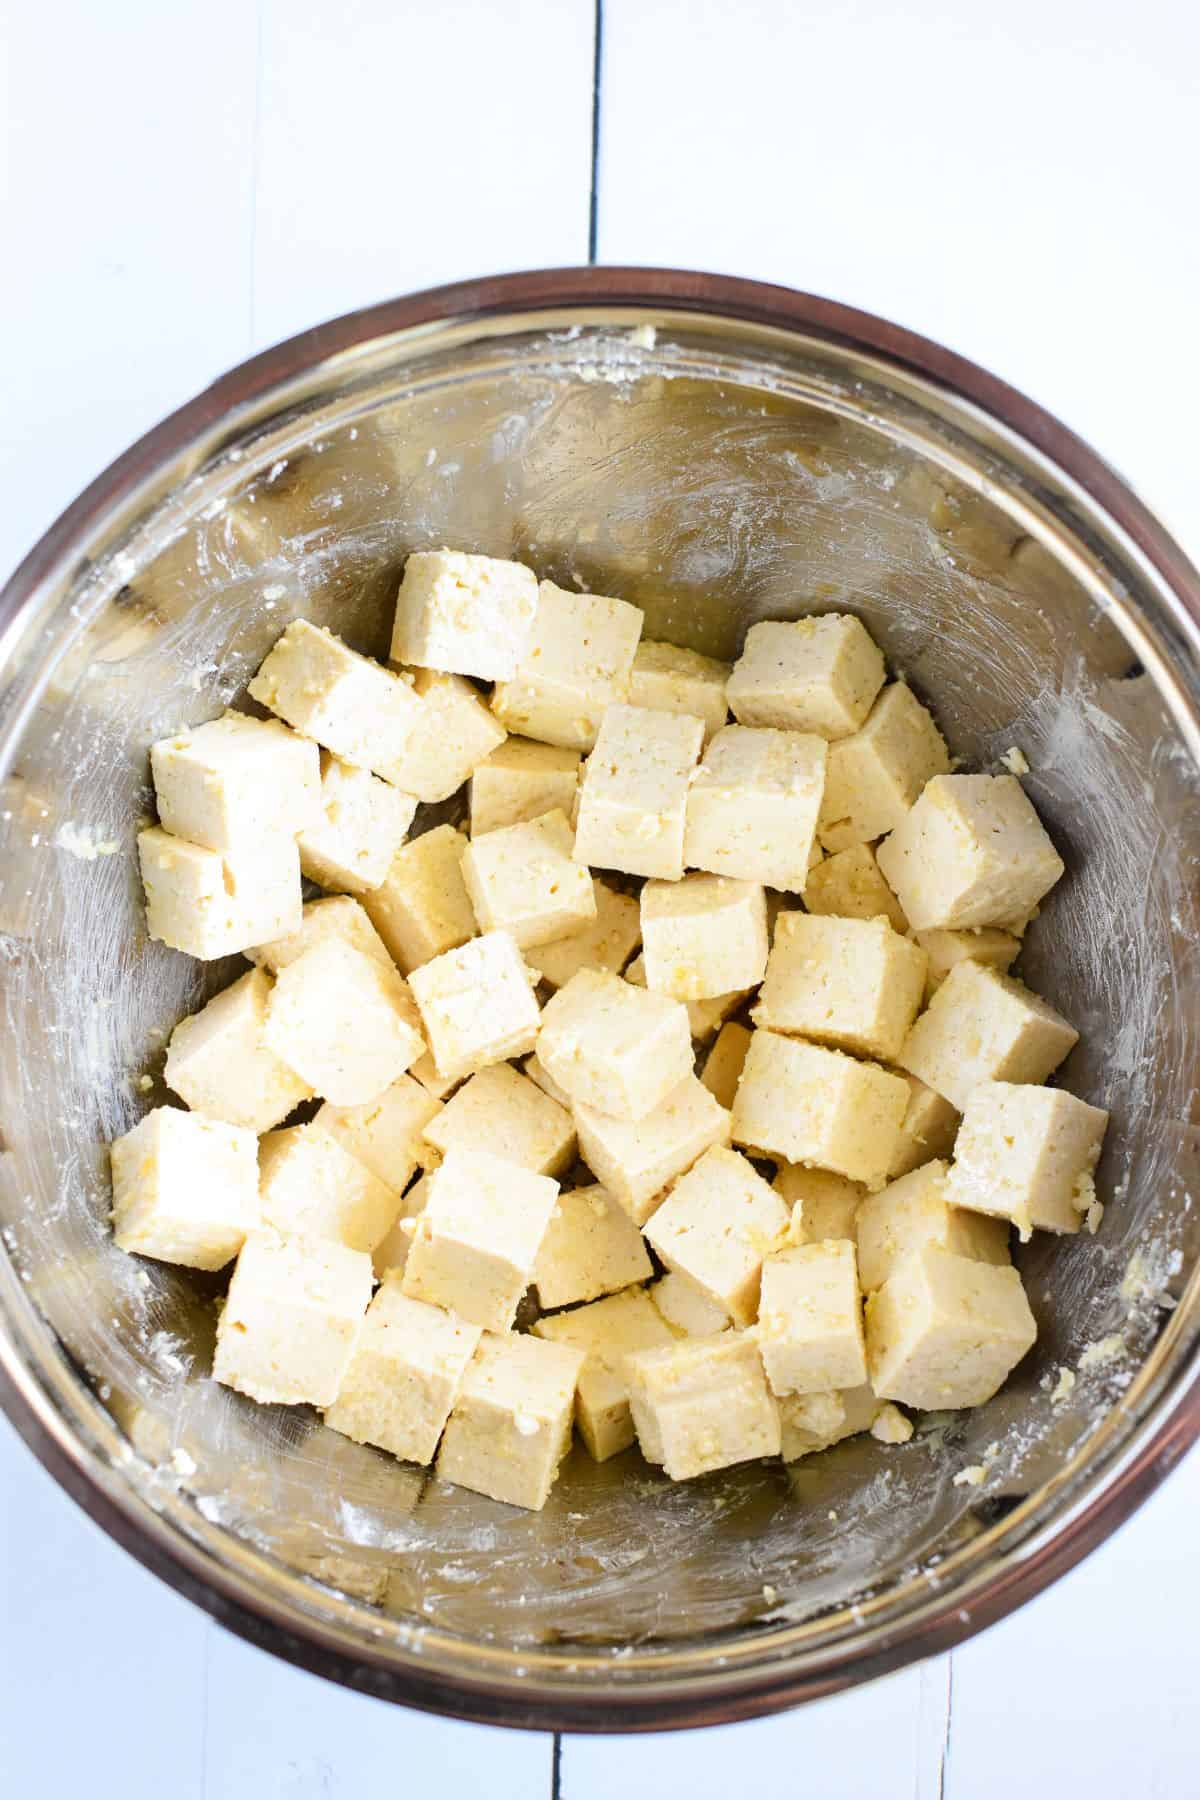 Tofu cut into cubes with coating in a mixing bowl.